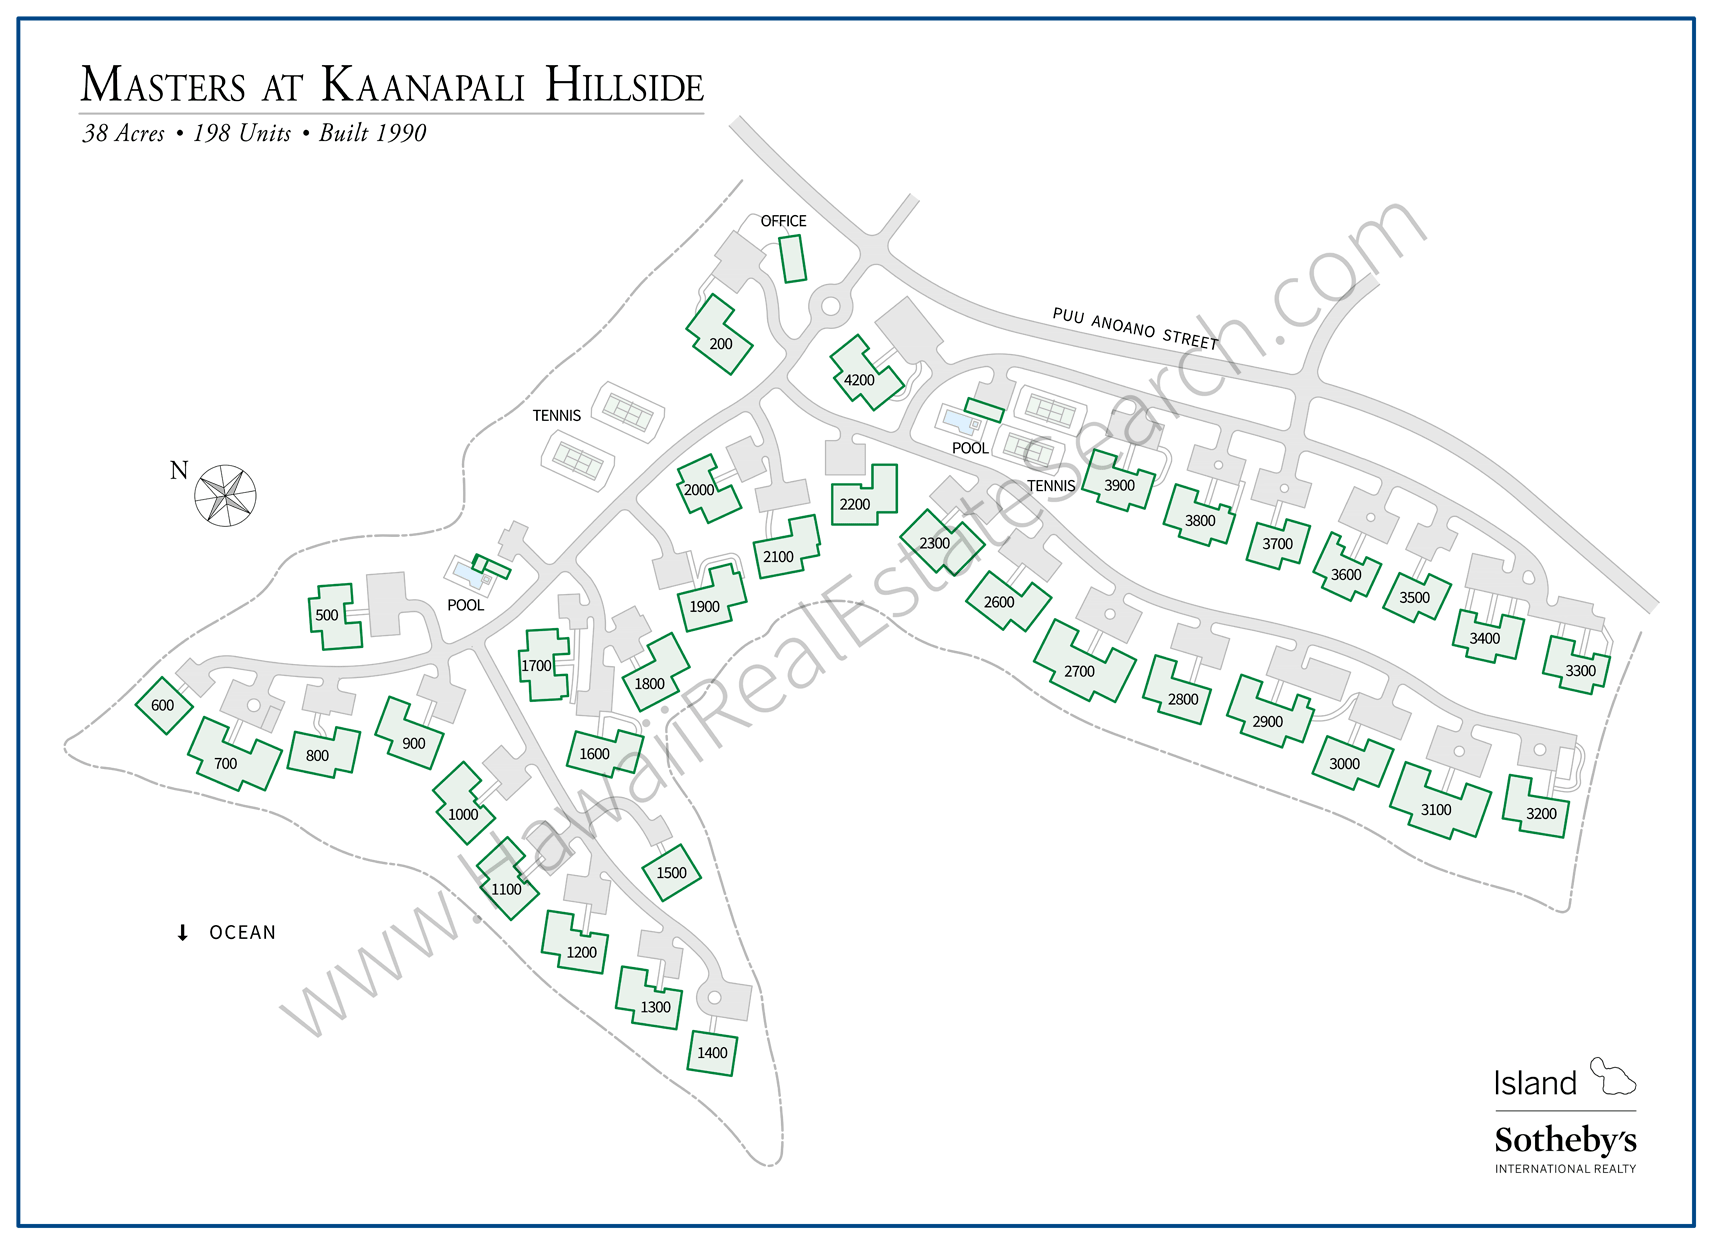 Masters Kaanapali Property Map Updated 2018